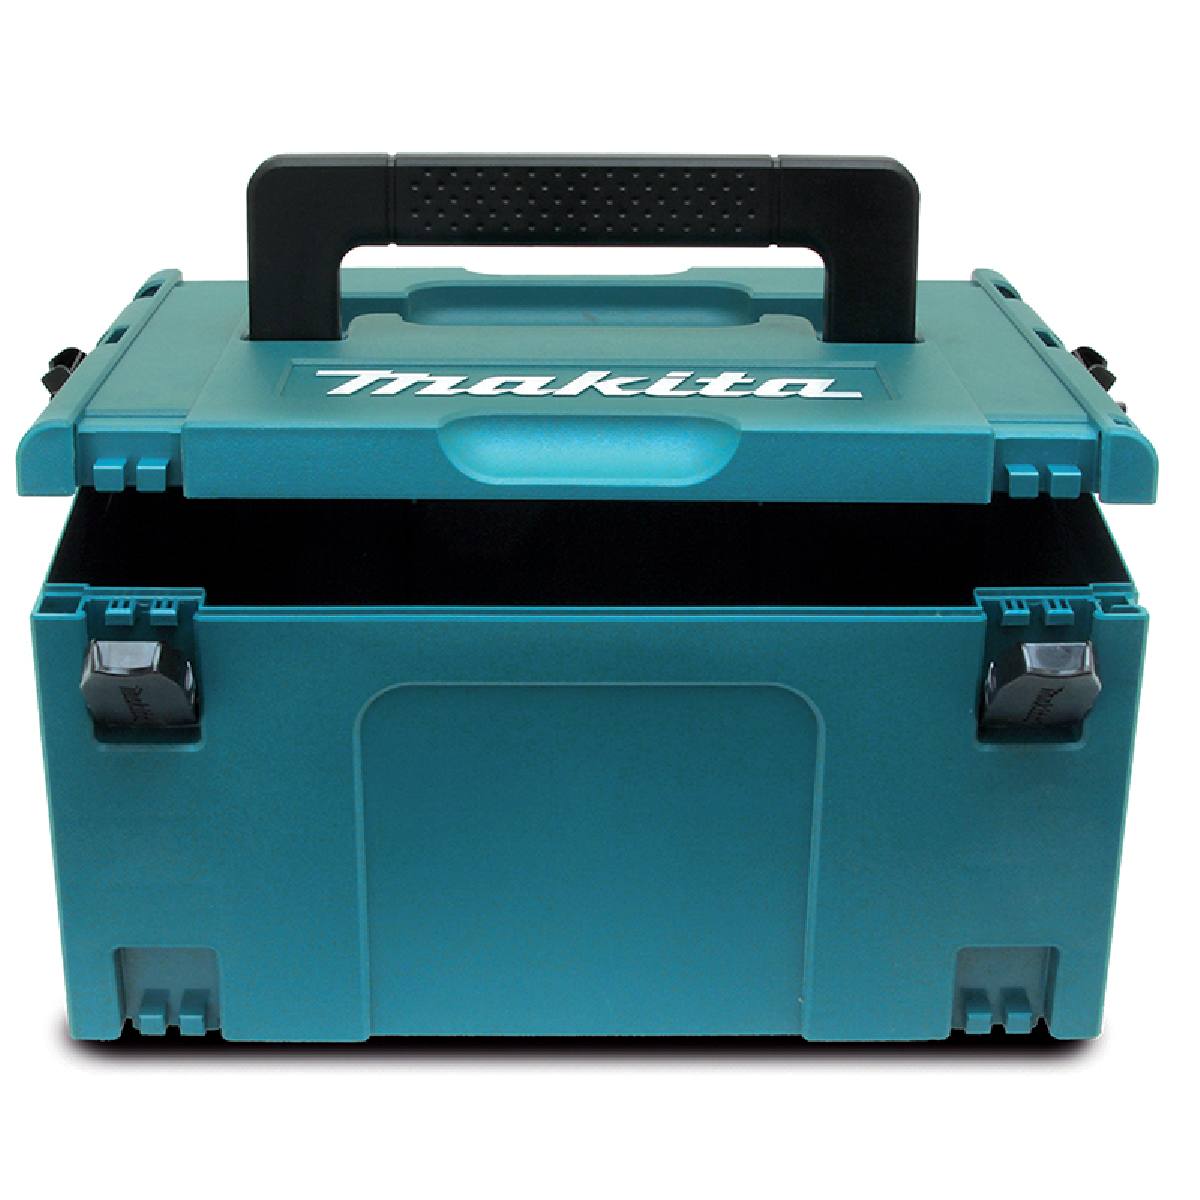 Makita BO6030 Ponceuse excentrique - 310W - 150mm